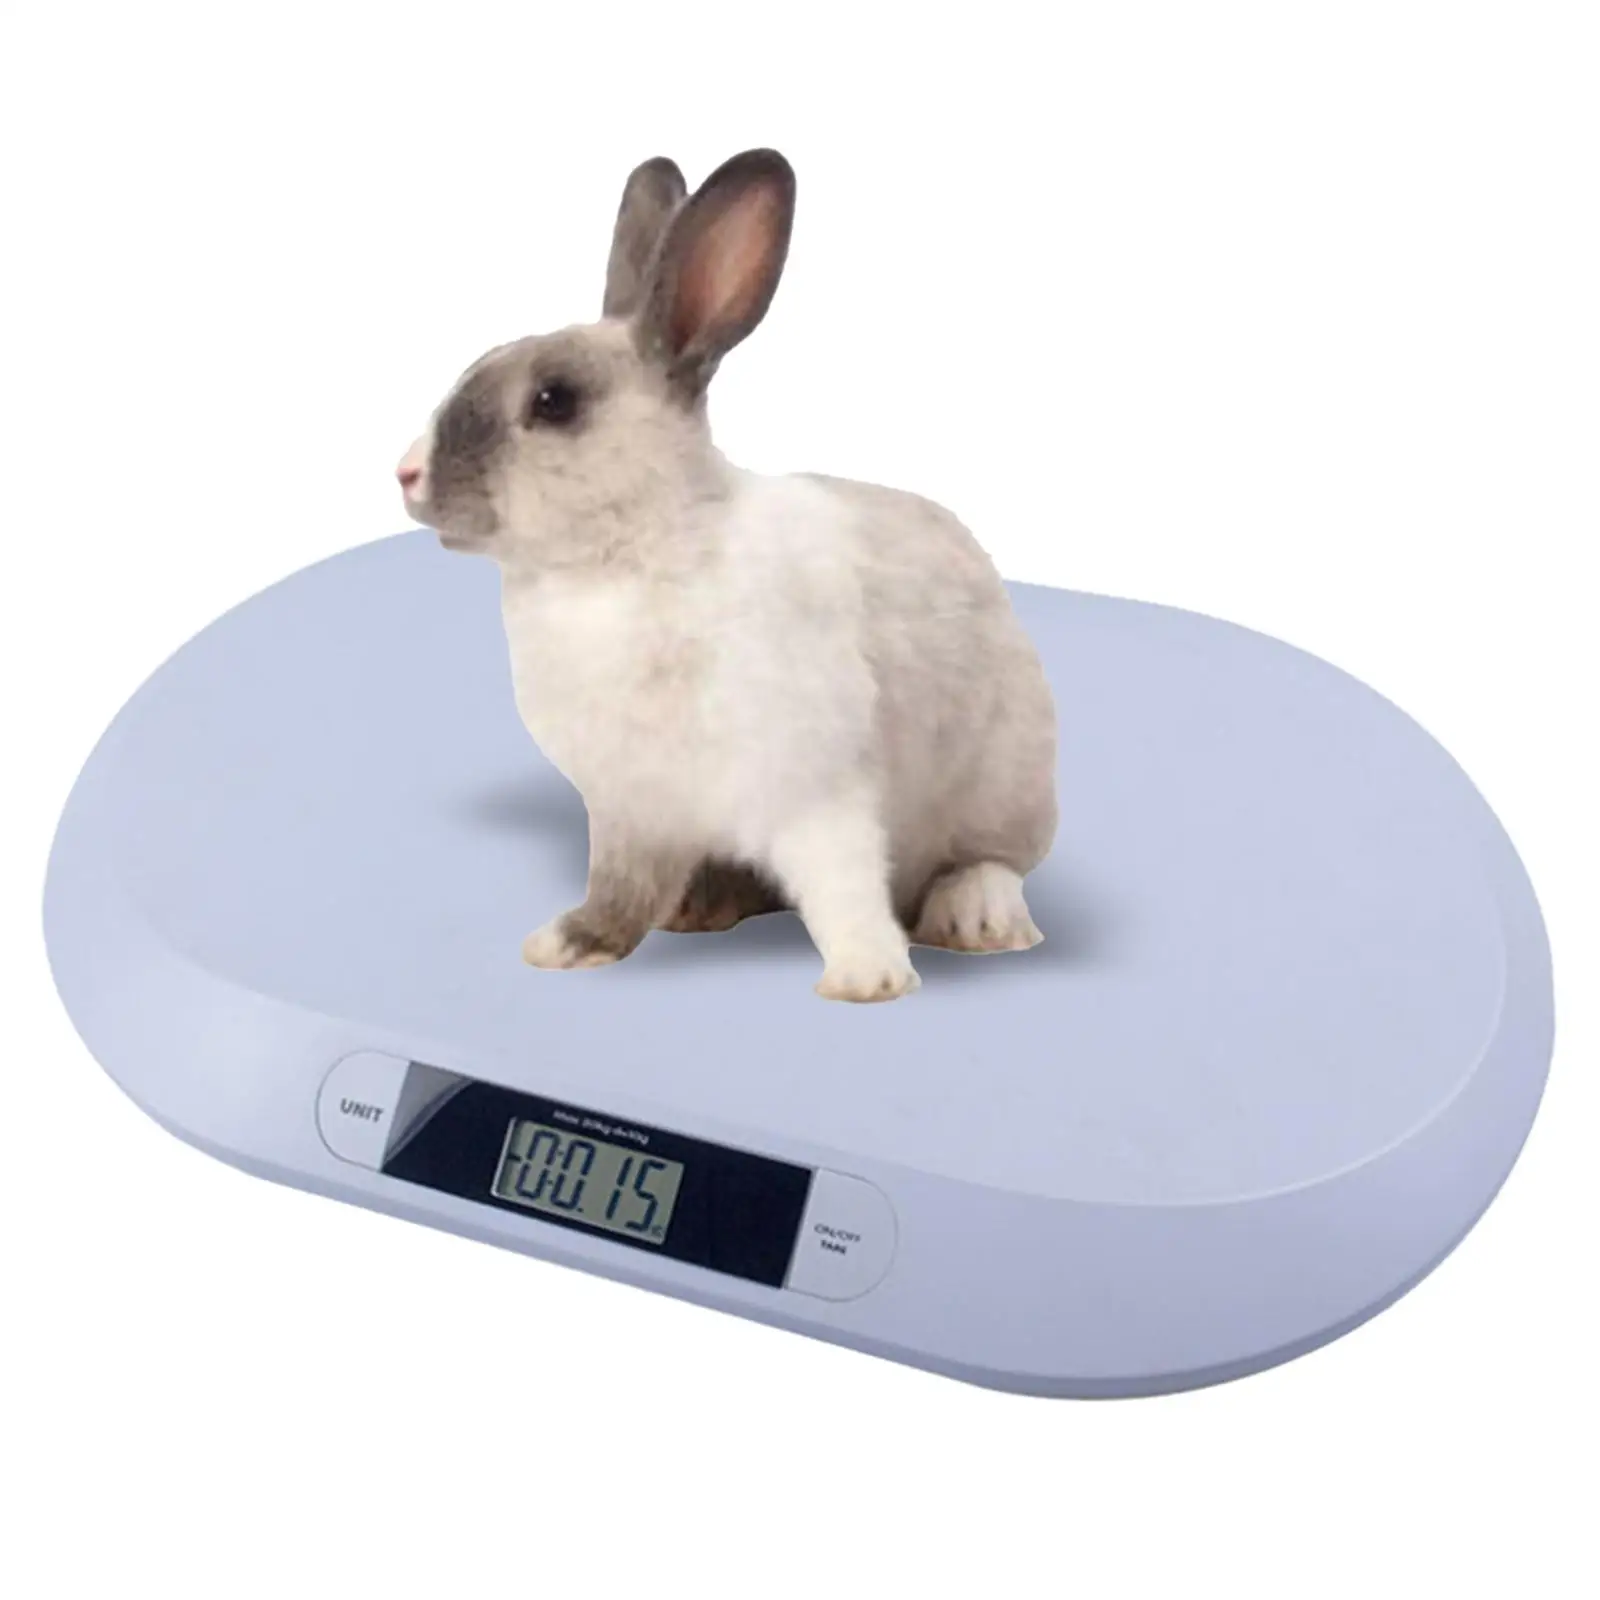 Electronic Pet Scale Accurate LCD Display 20kg Comfort for Infants Cats Dogs